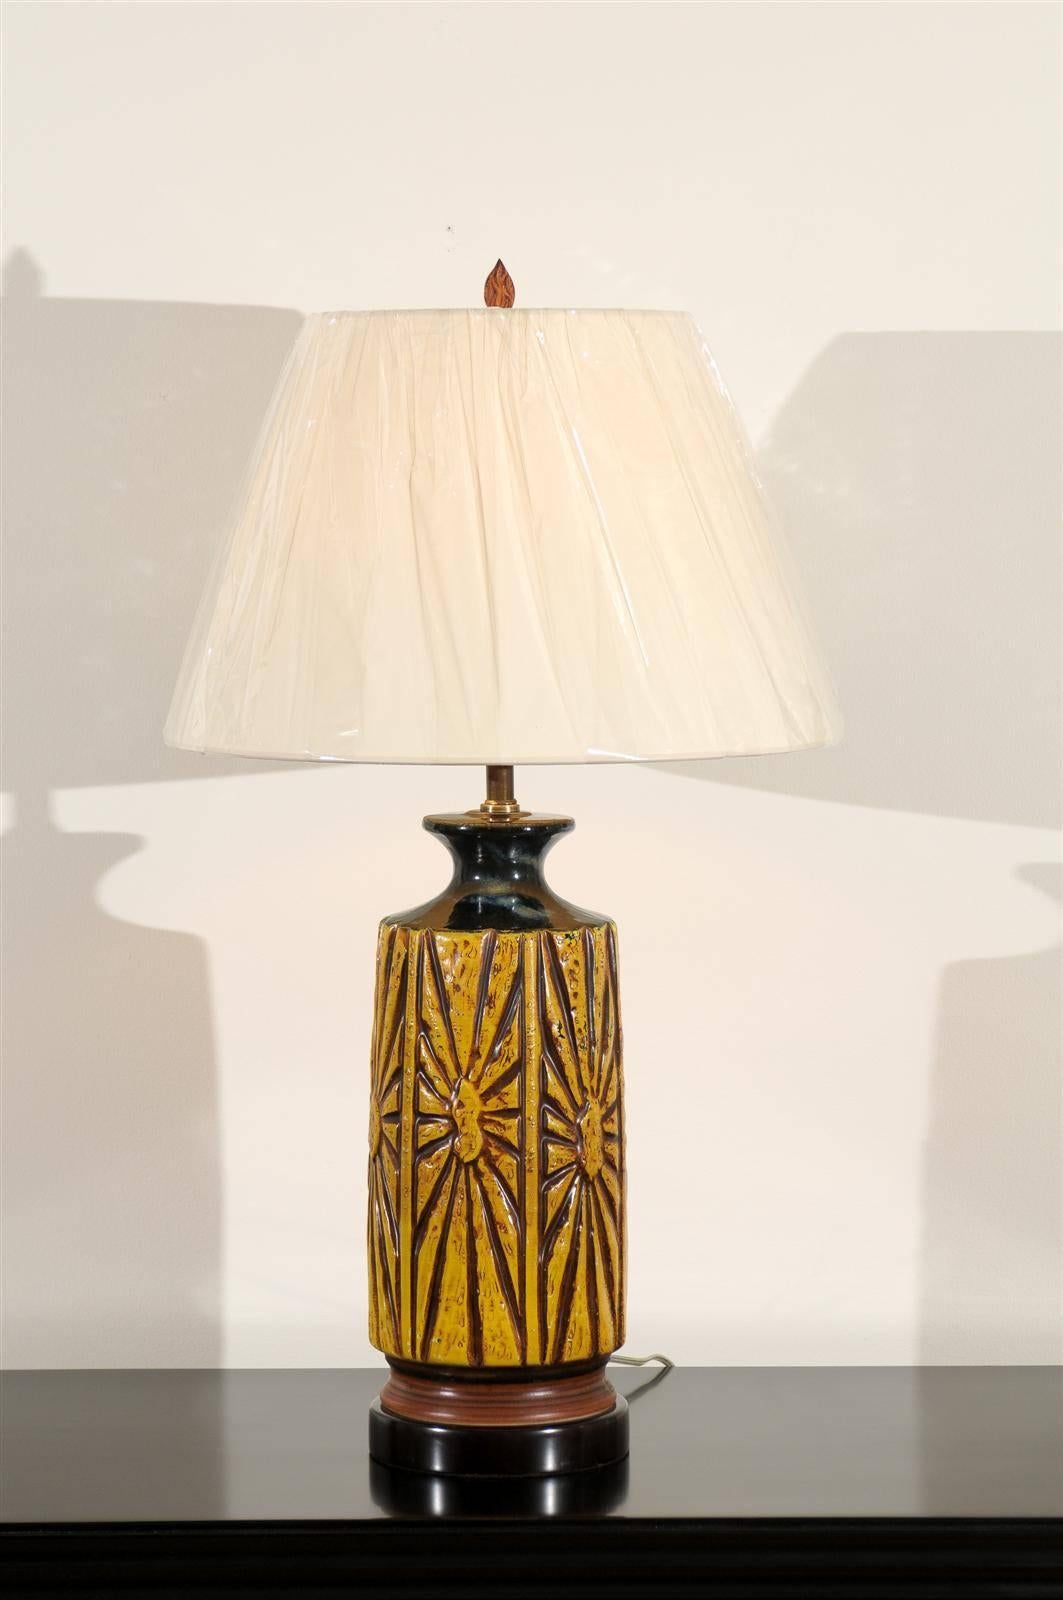 A wonderful pair of large-scale ceramic lamps, circa 1960. Graphic design with fabulous color. Heavy, beautifully made pieces. Exceptional jewelry! Excellent restored condition. Rewired using clear cord; new brass 3-way sockets with brass turn